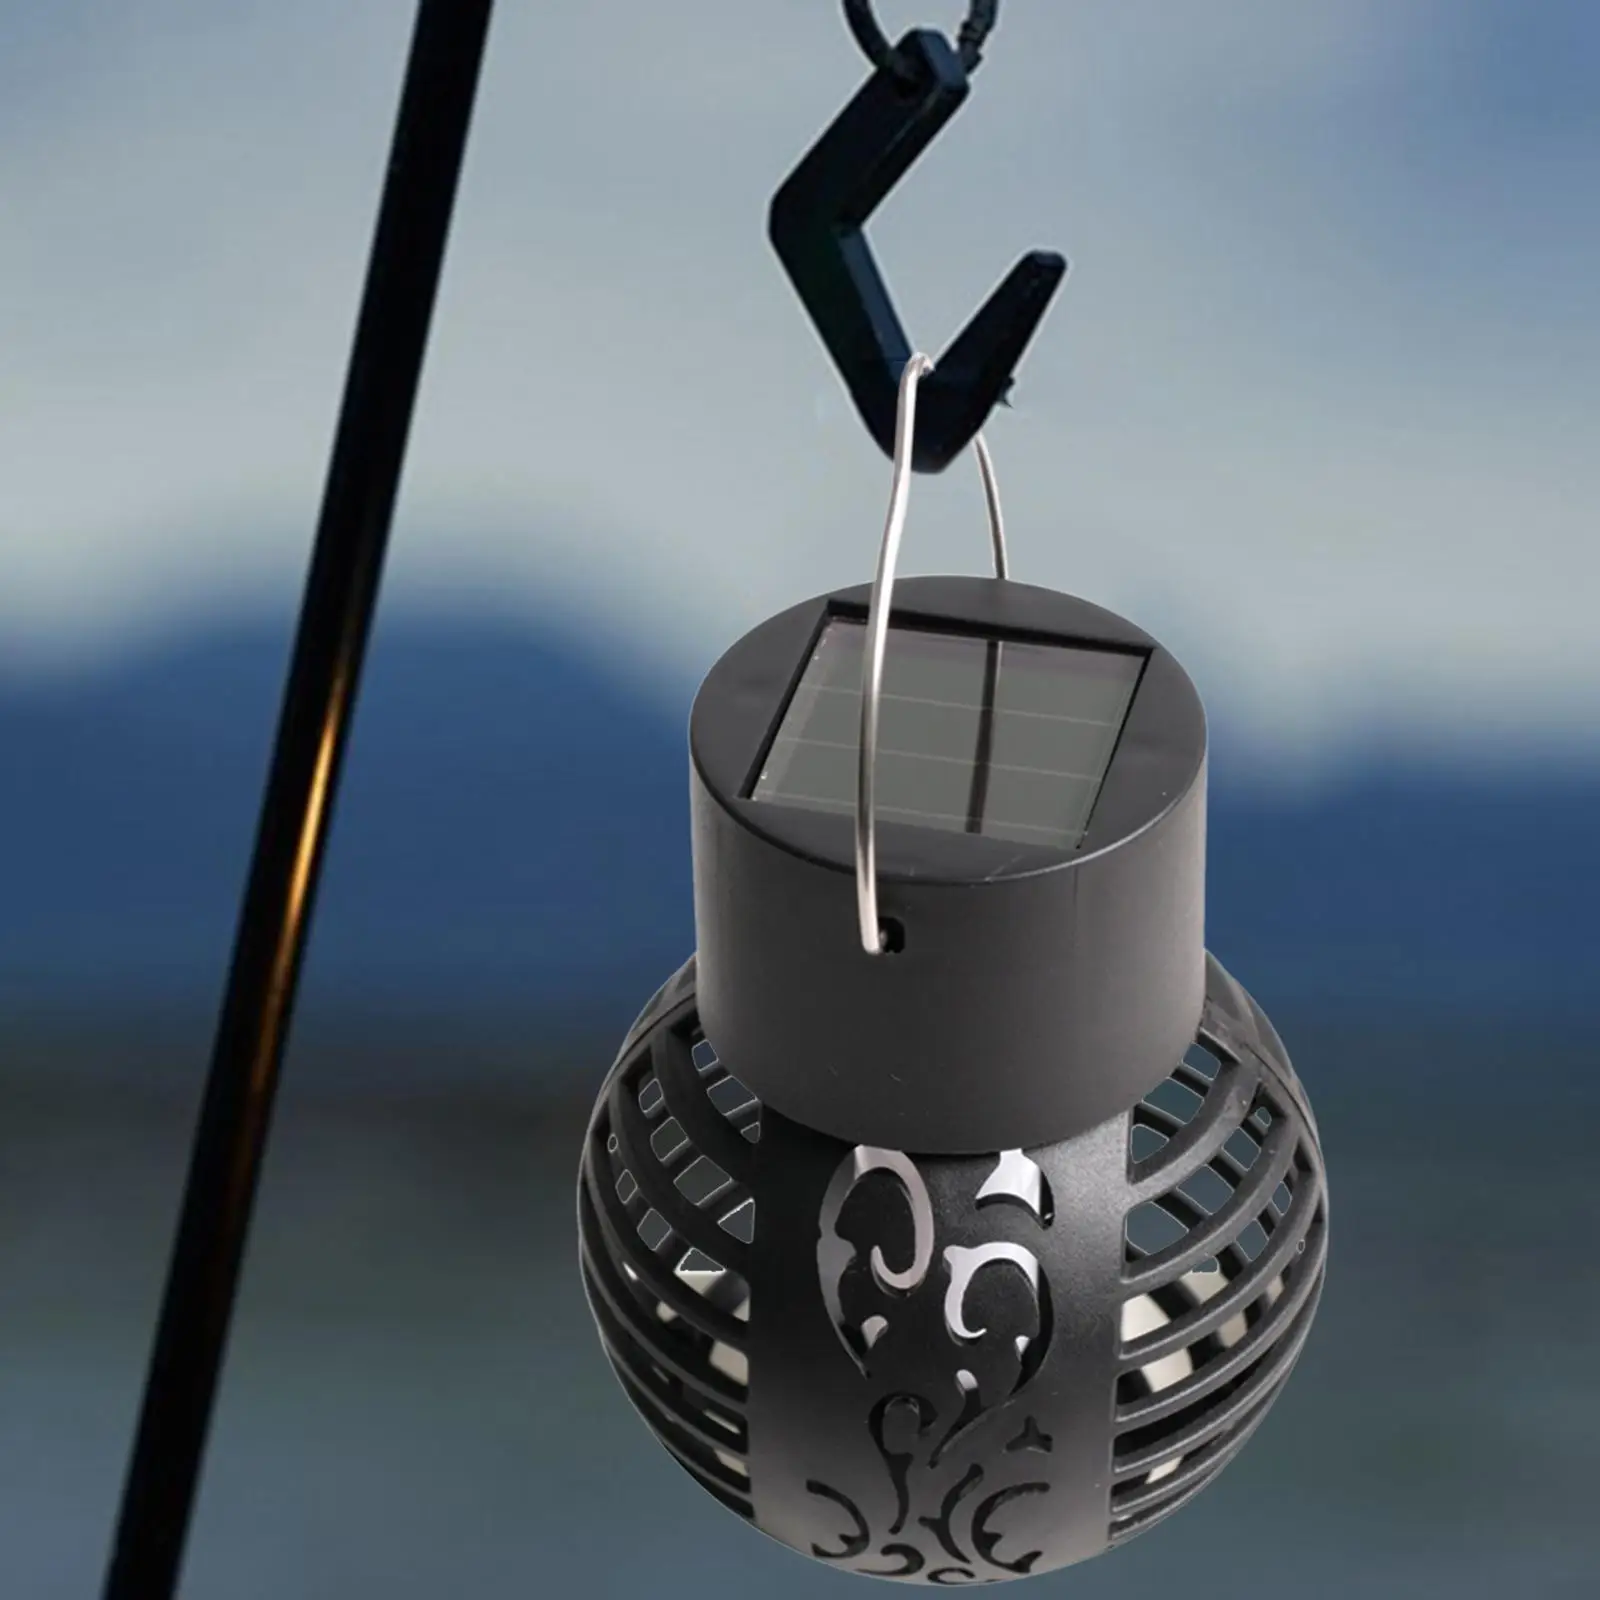 Hanging Solar Lantern Lights Retro Style Crafts Ball Shape with Handle Activities Outdoor Lamp for Camping Hiking Fishing